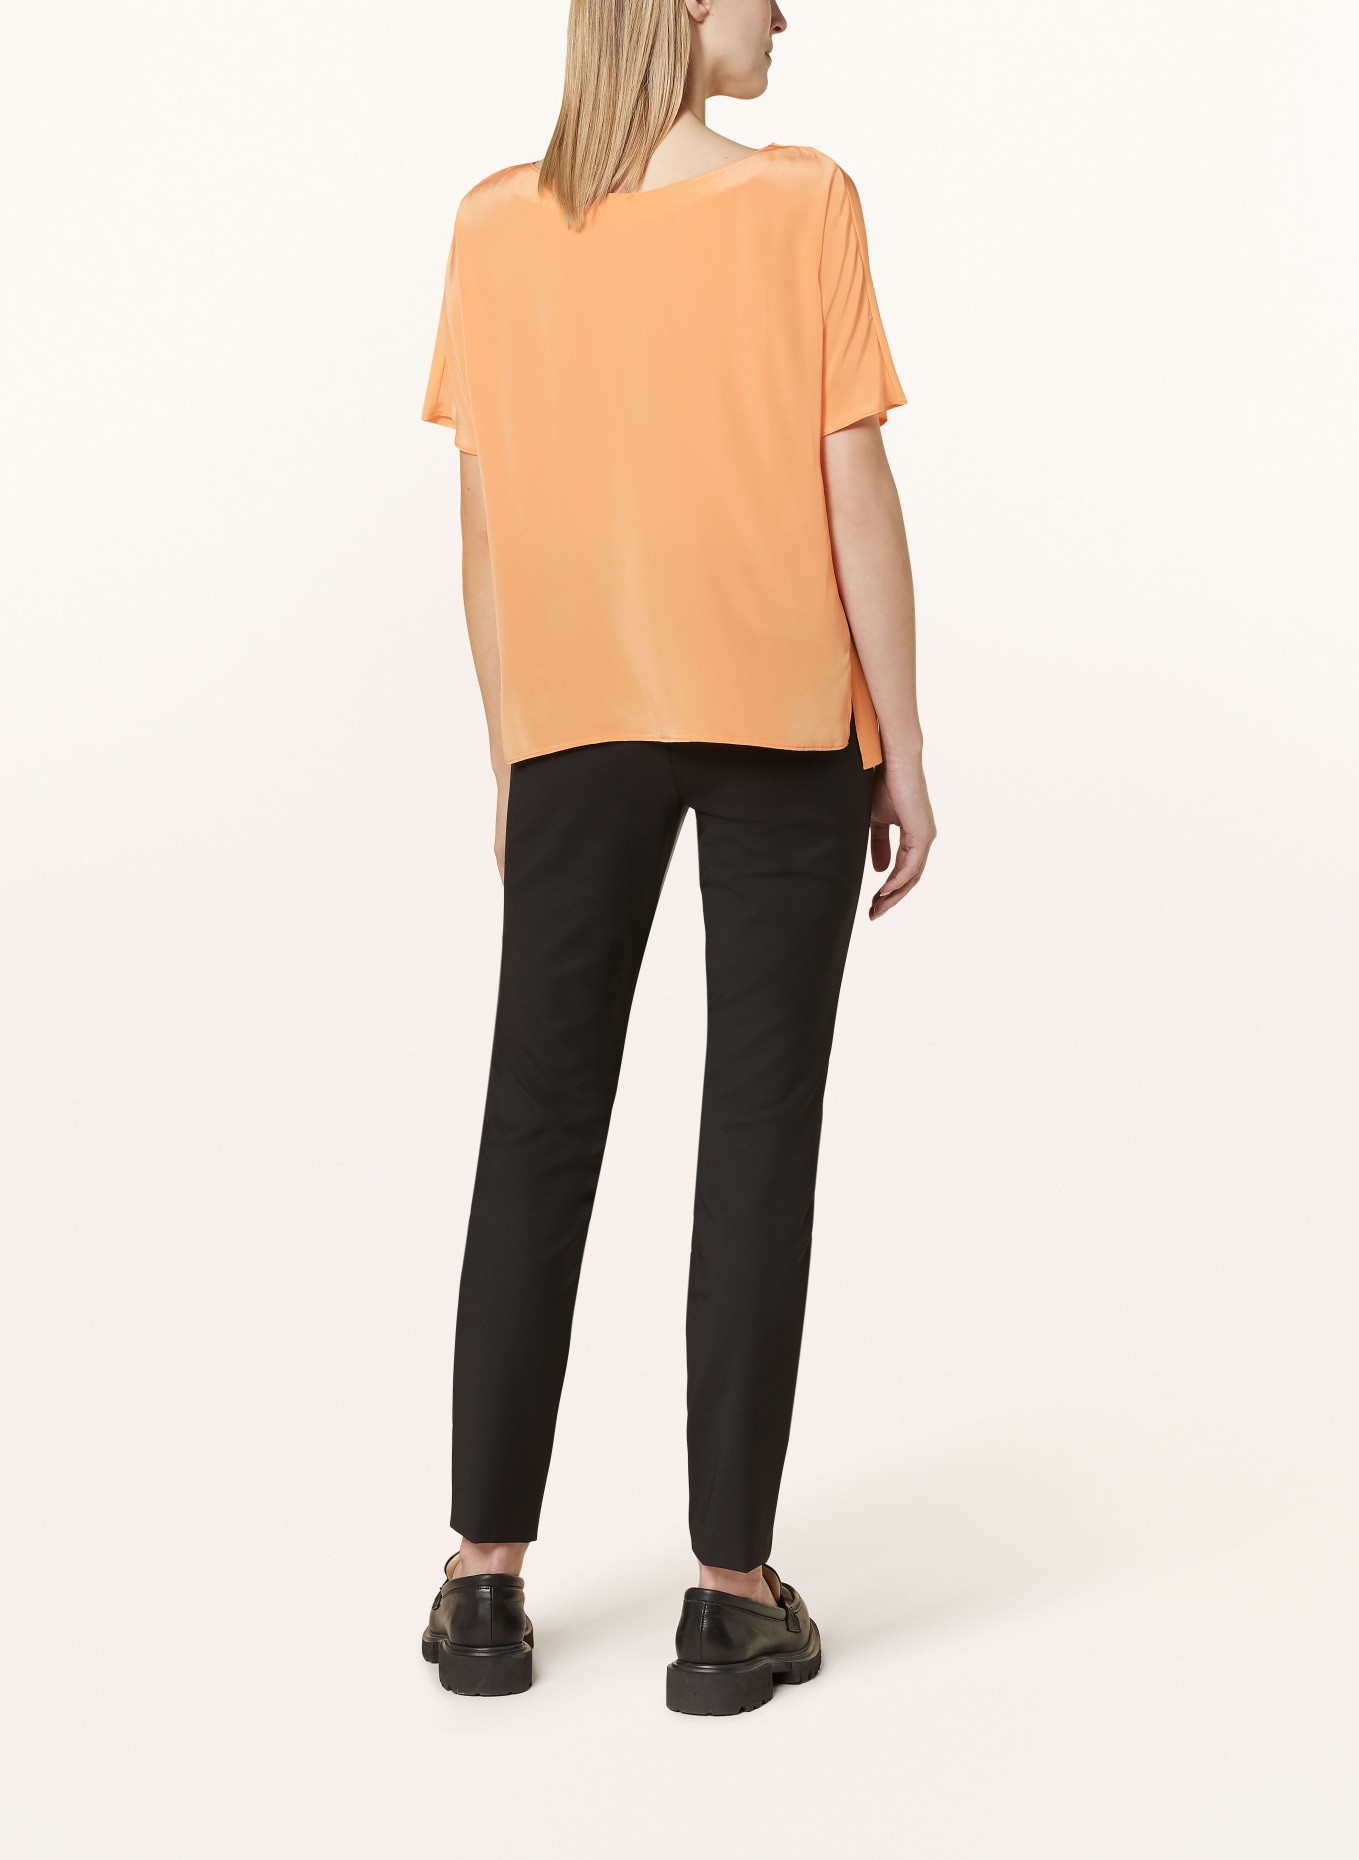 SPORTALM Shirt blouse with 3/4 sleeves, Color: ORANGE (Image 3)